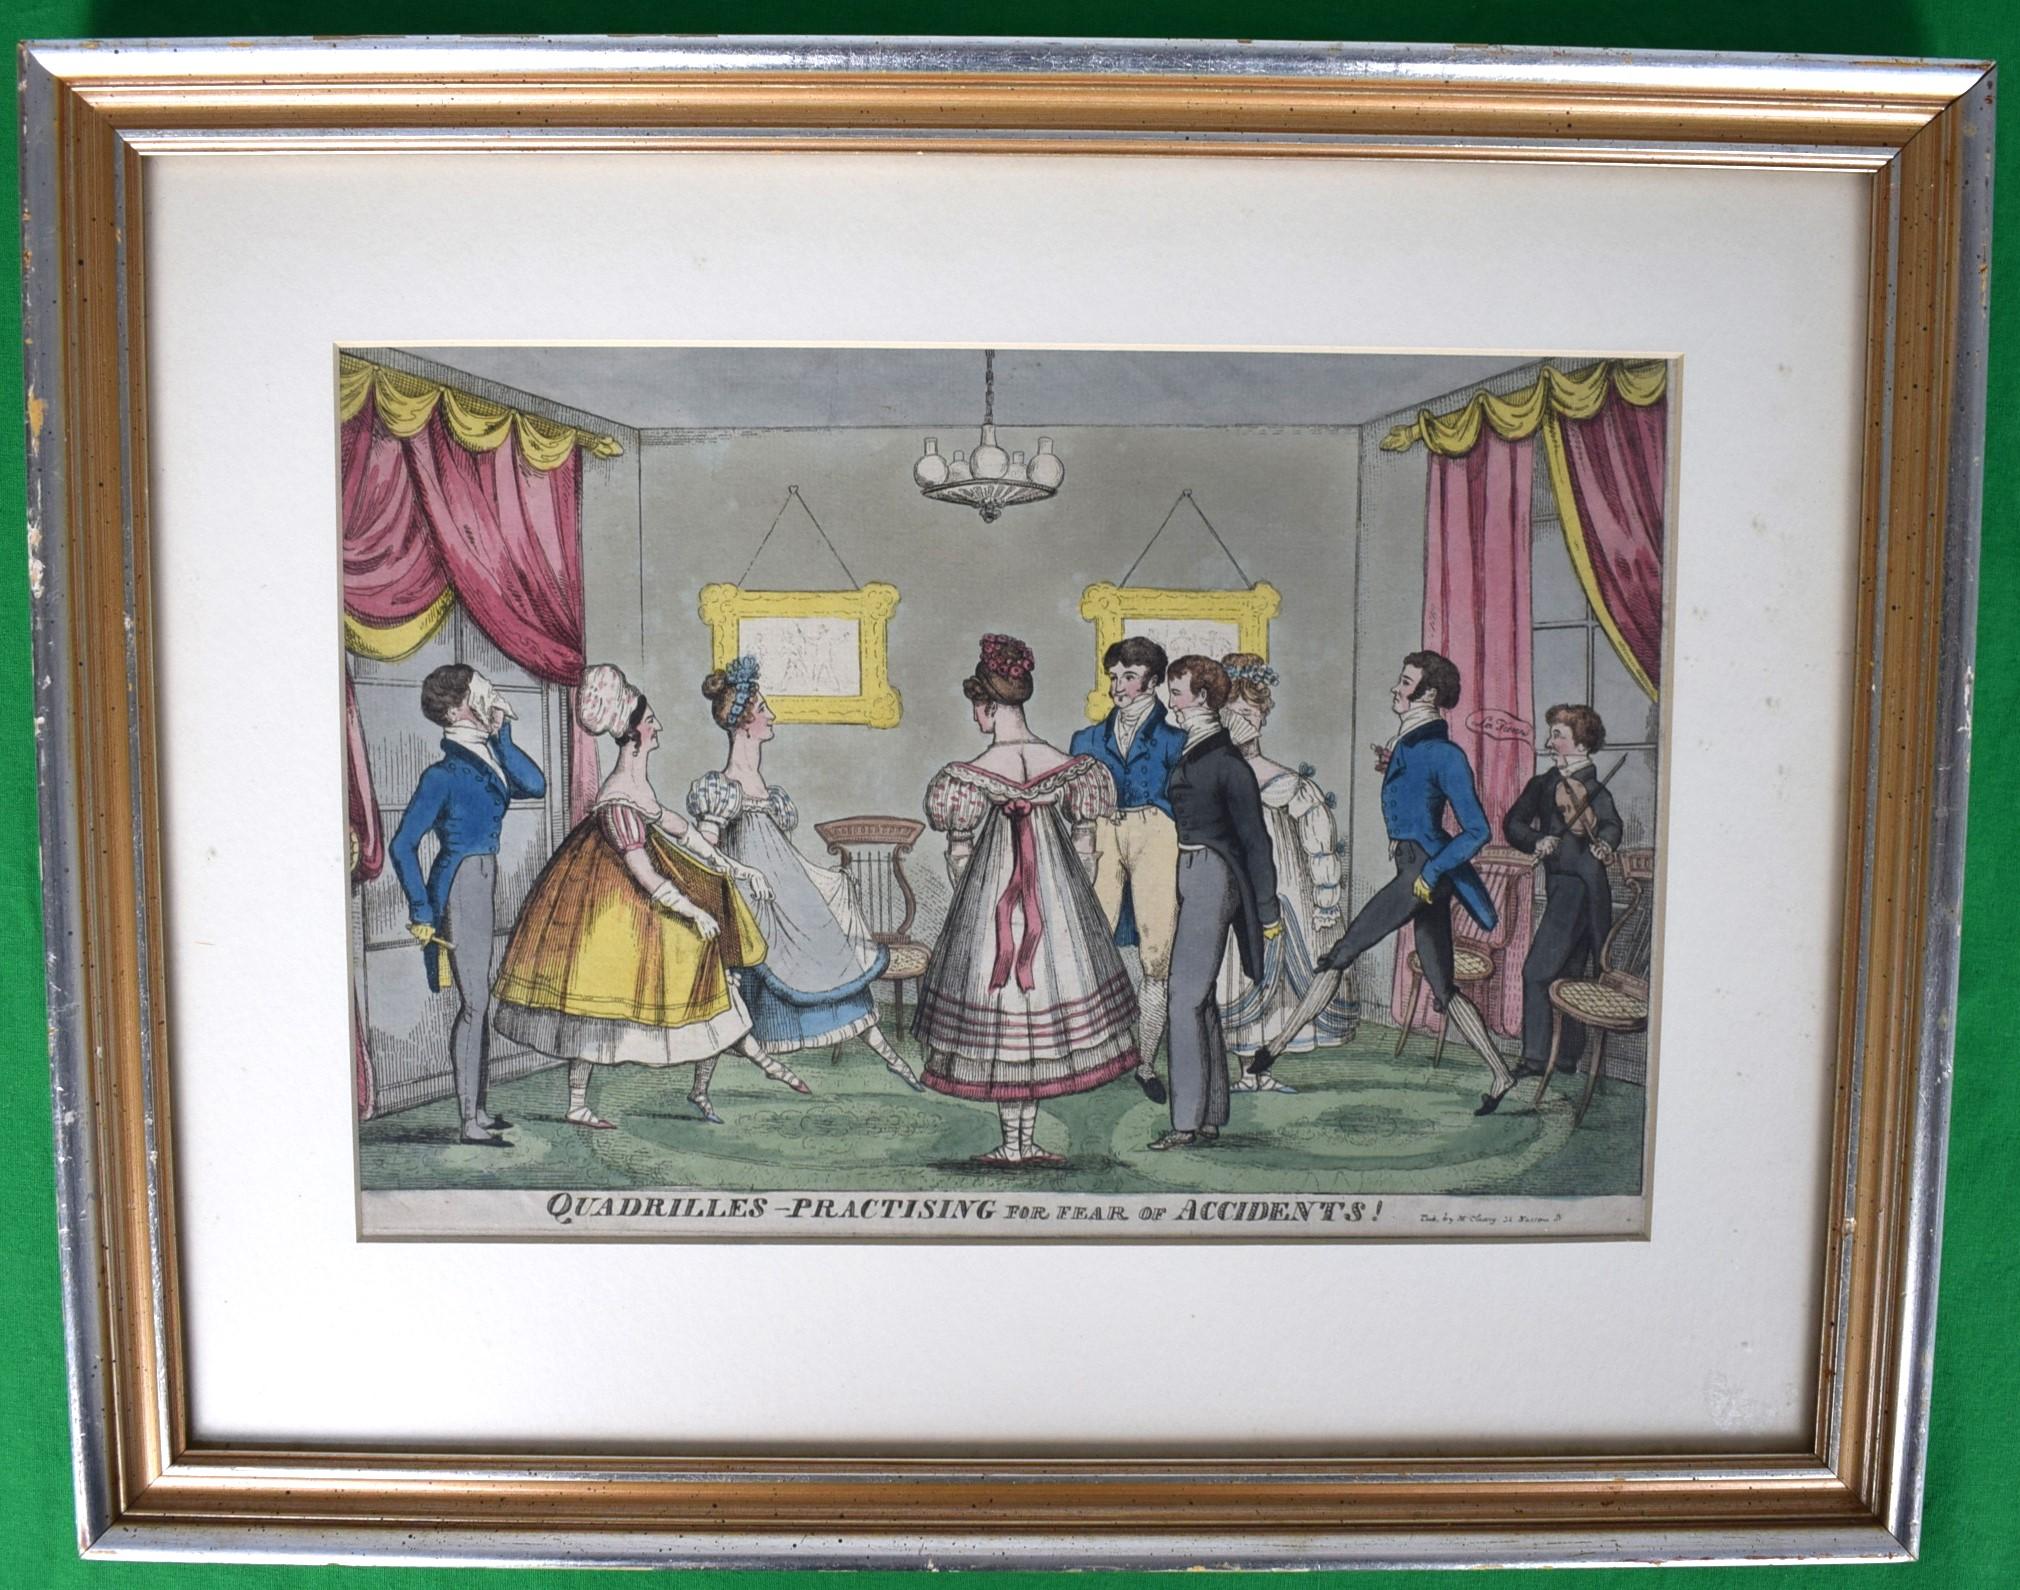 Quadrilles-Practising For Fear Of Accidents! - Print by Isaac Robert Cruikshank